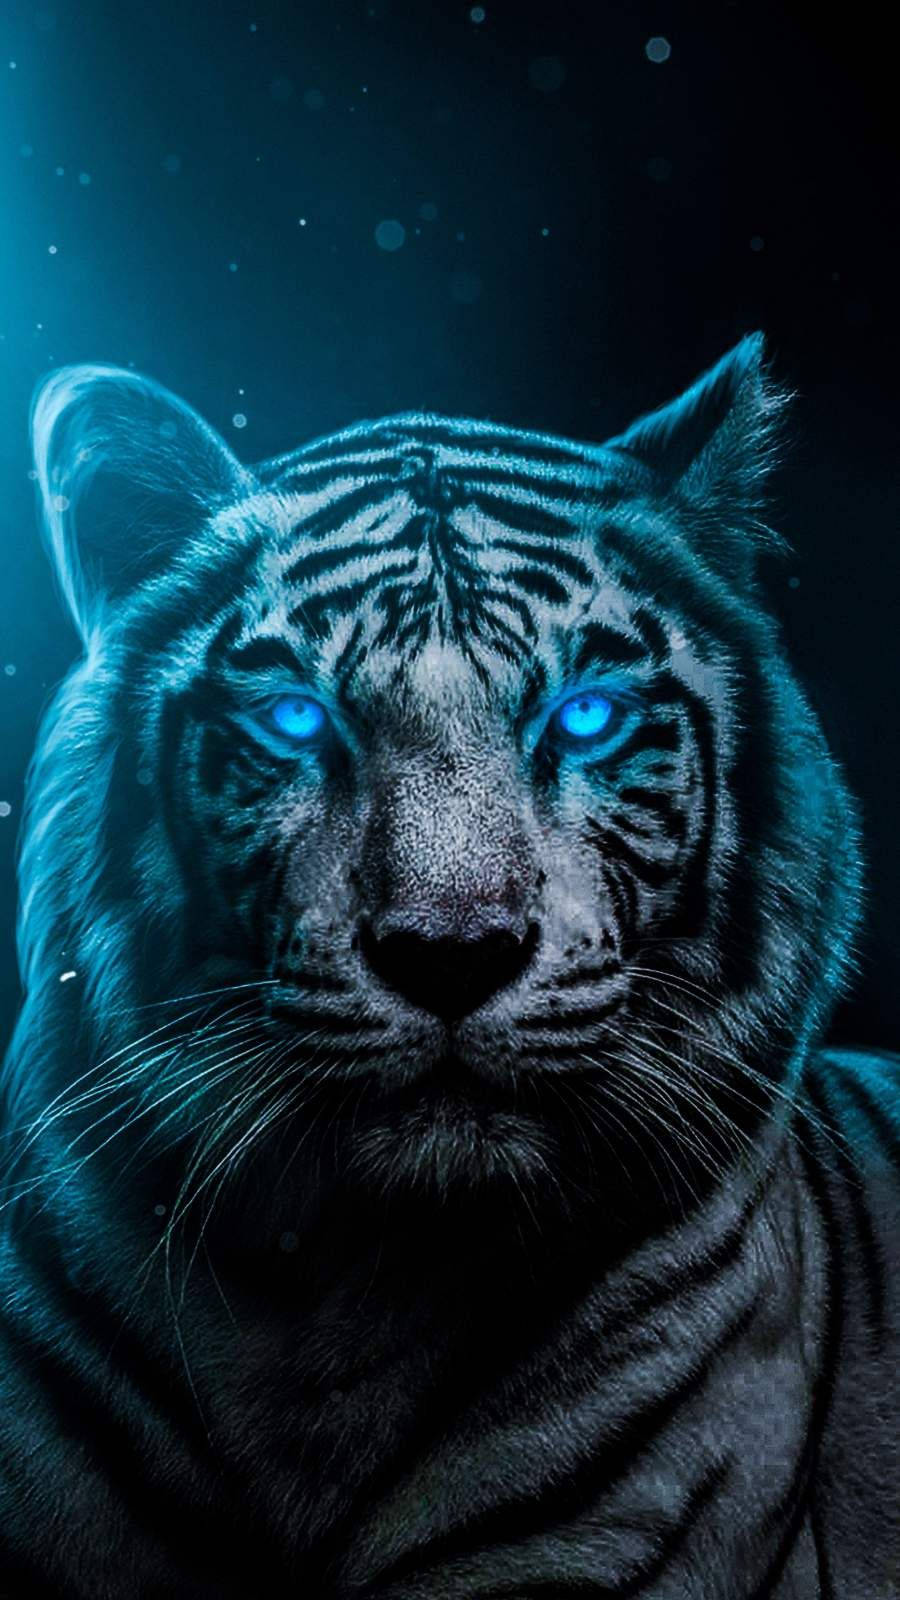 Majestic Blue-eyed Tiger For Iphone Wallpaper